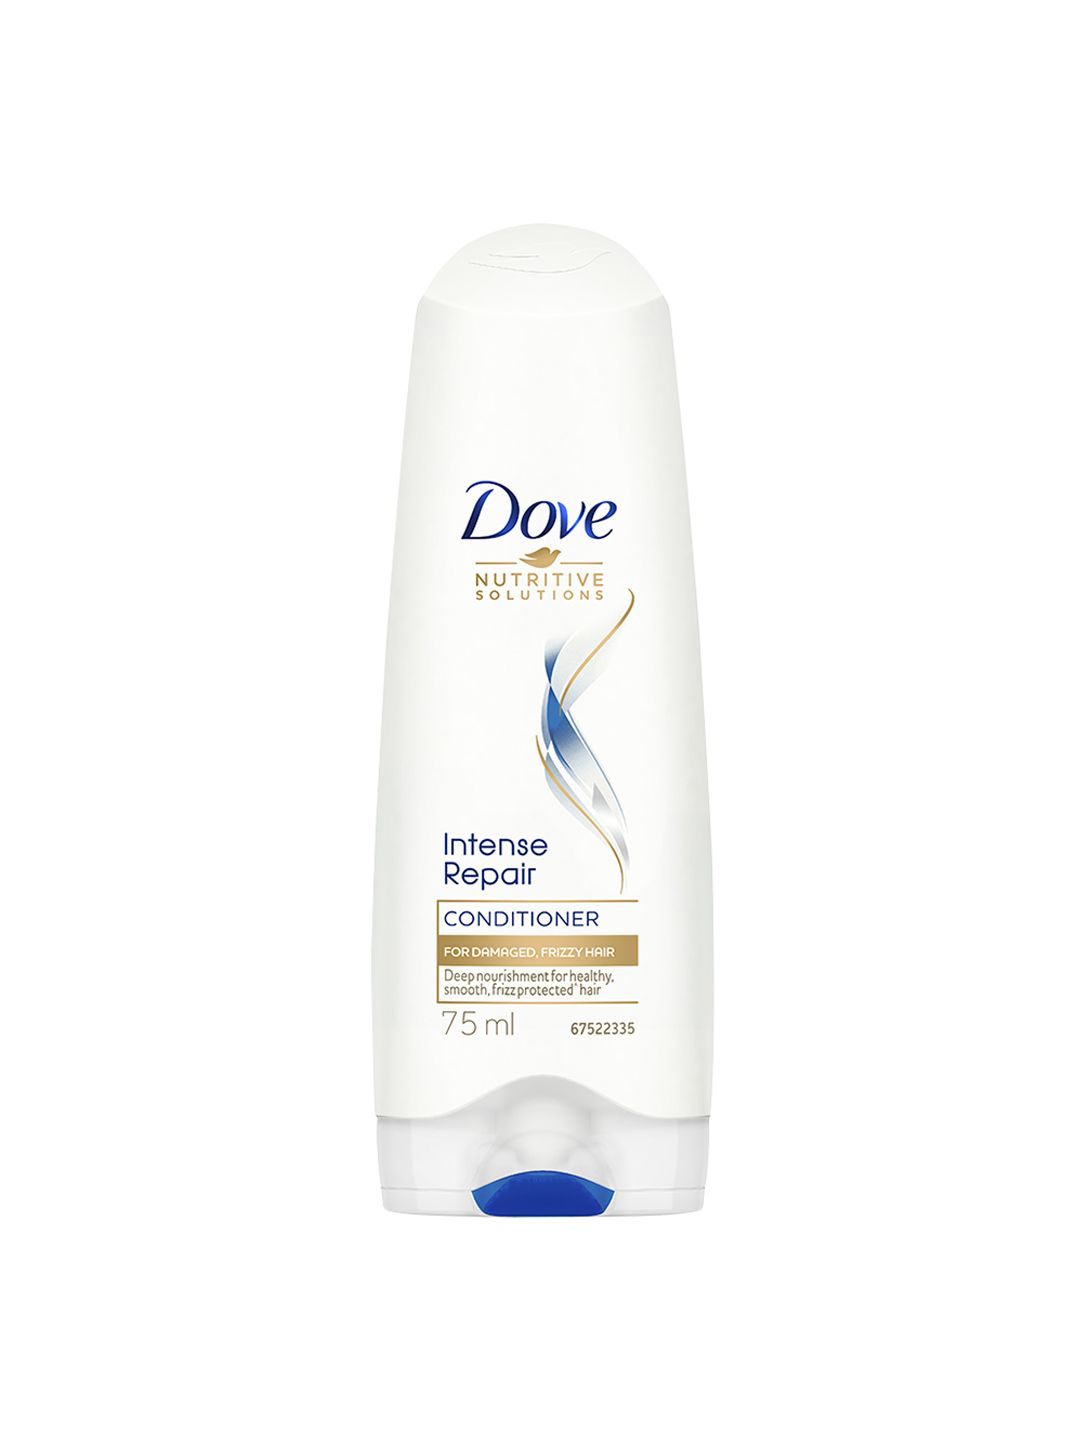 Dove Intense Repair Hair Conditioner For Damaged And Frizzy Hair 75 ml Price in India